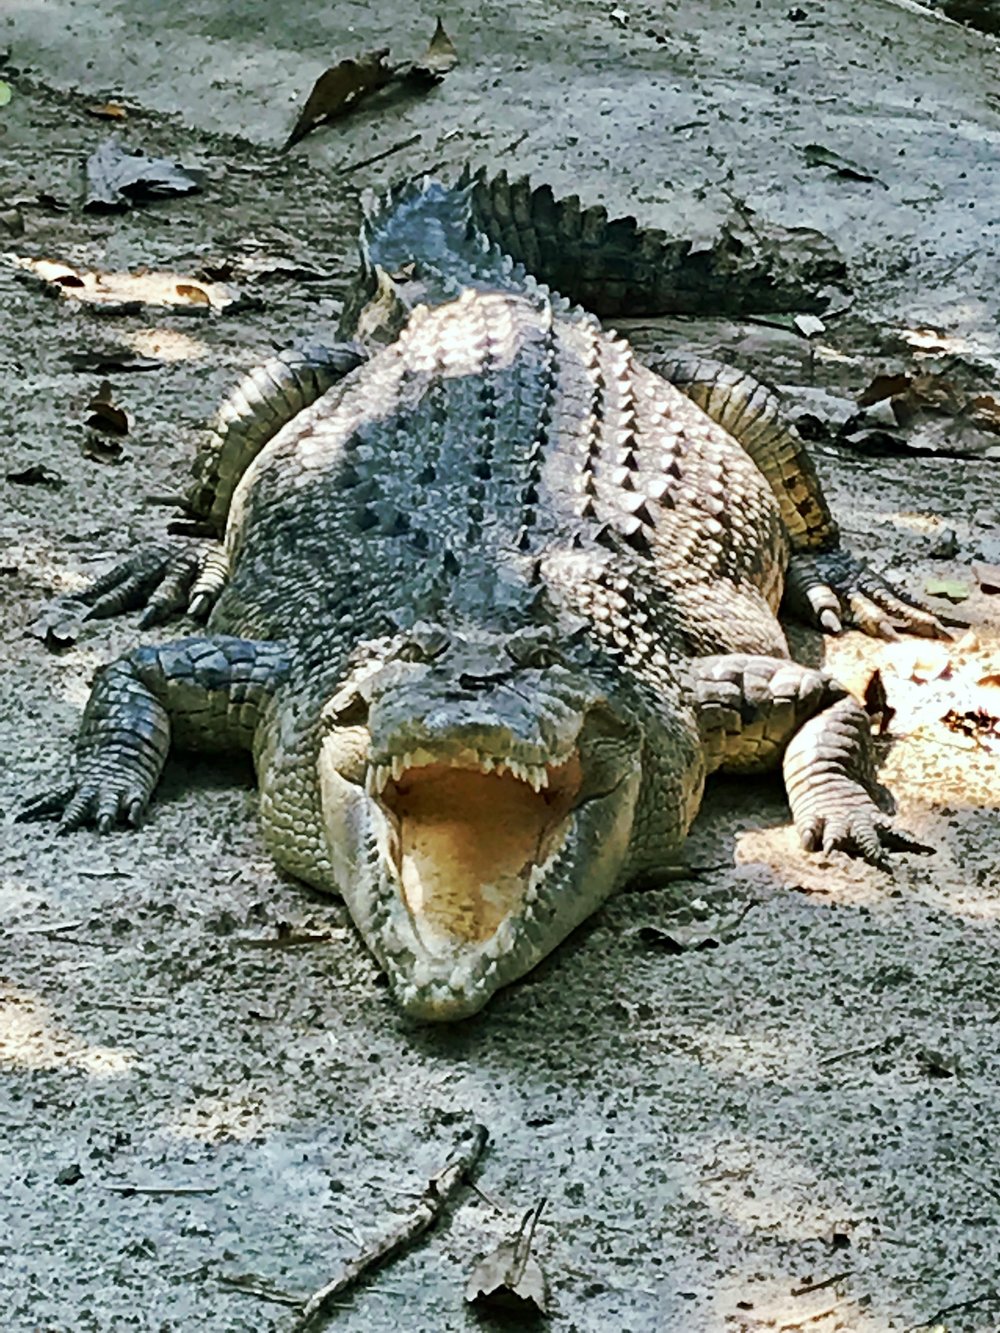 The one and only resident crocodile at WFFT